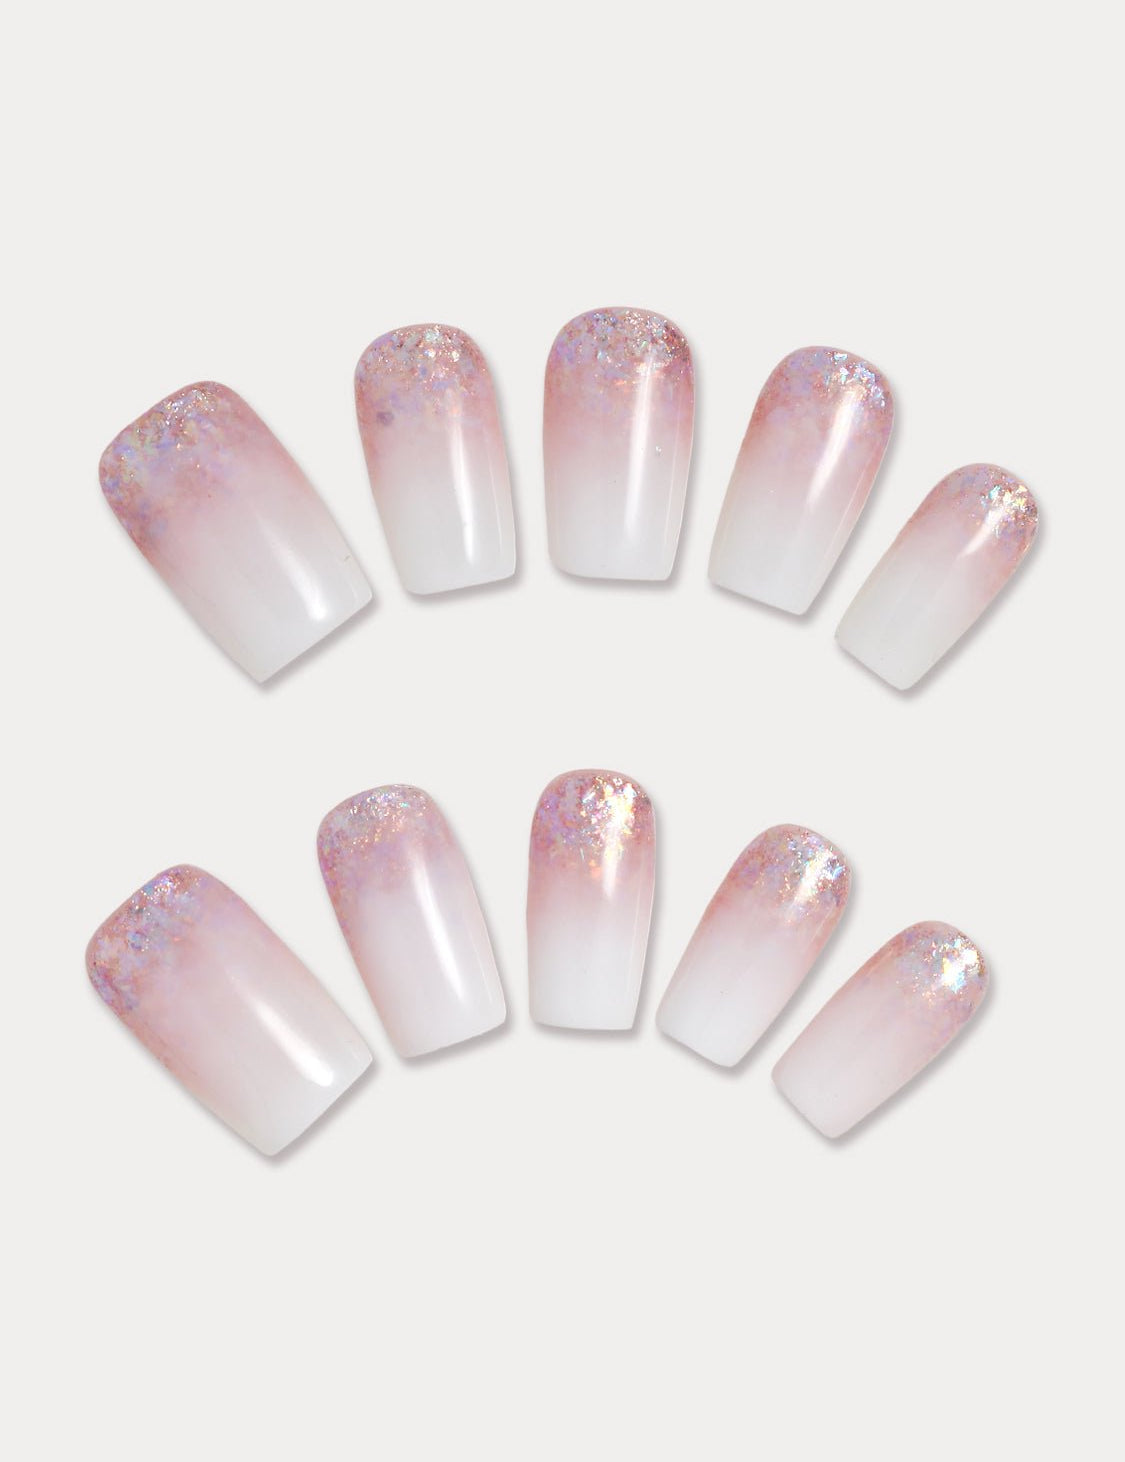 MIEAP Pink Ombre Glitter press on nail set combines the classic white ombre design with pink glitter gel, creating a beautiful dual-color ombre effect. The nails transition naturally from a white base at the fingertips to a pink glitter gel near the cuticles. #MIEAP #MIEAPnails #pressonnail #falsenail #acrylicnail #nails #nailart #naildesign #nailinspo #handmadenail #summernail #nail2023 #graduationnail #weddingnail #glitternail #whitenail #pinknaial #ombrenail #datingnail #promnail